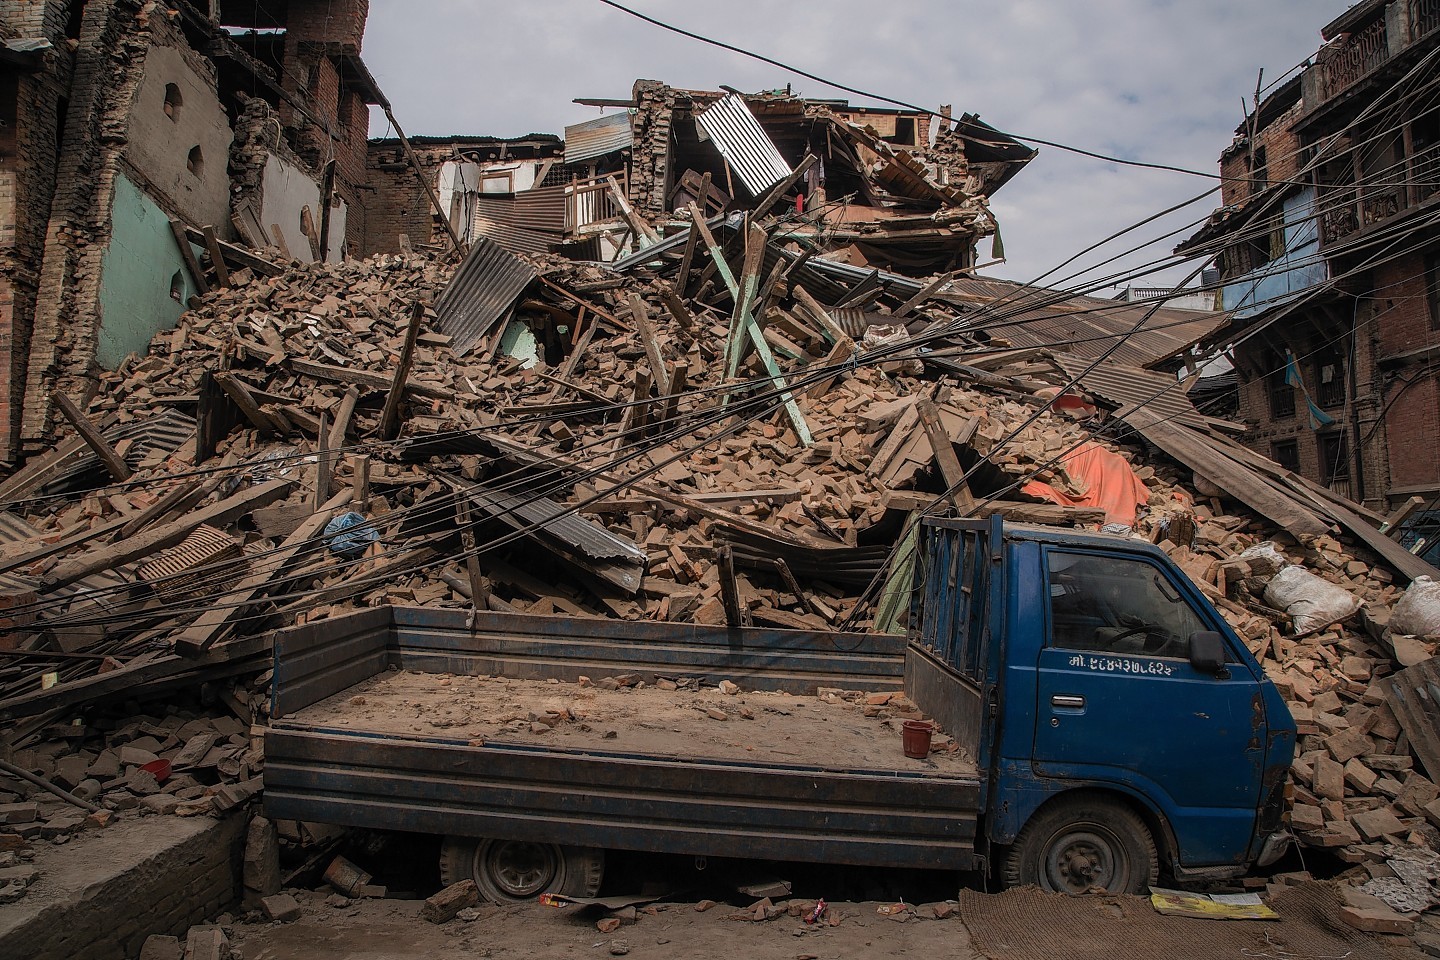 The Scottish Government has donated £250,000 towards the relief effort in Nepal.